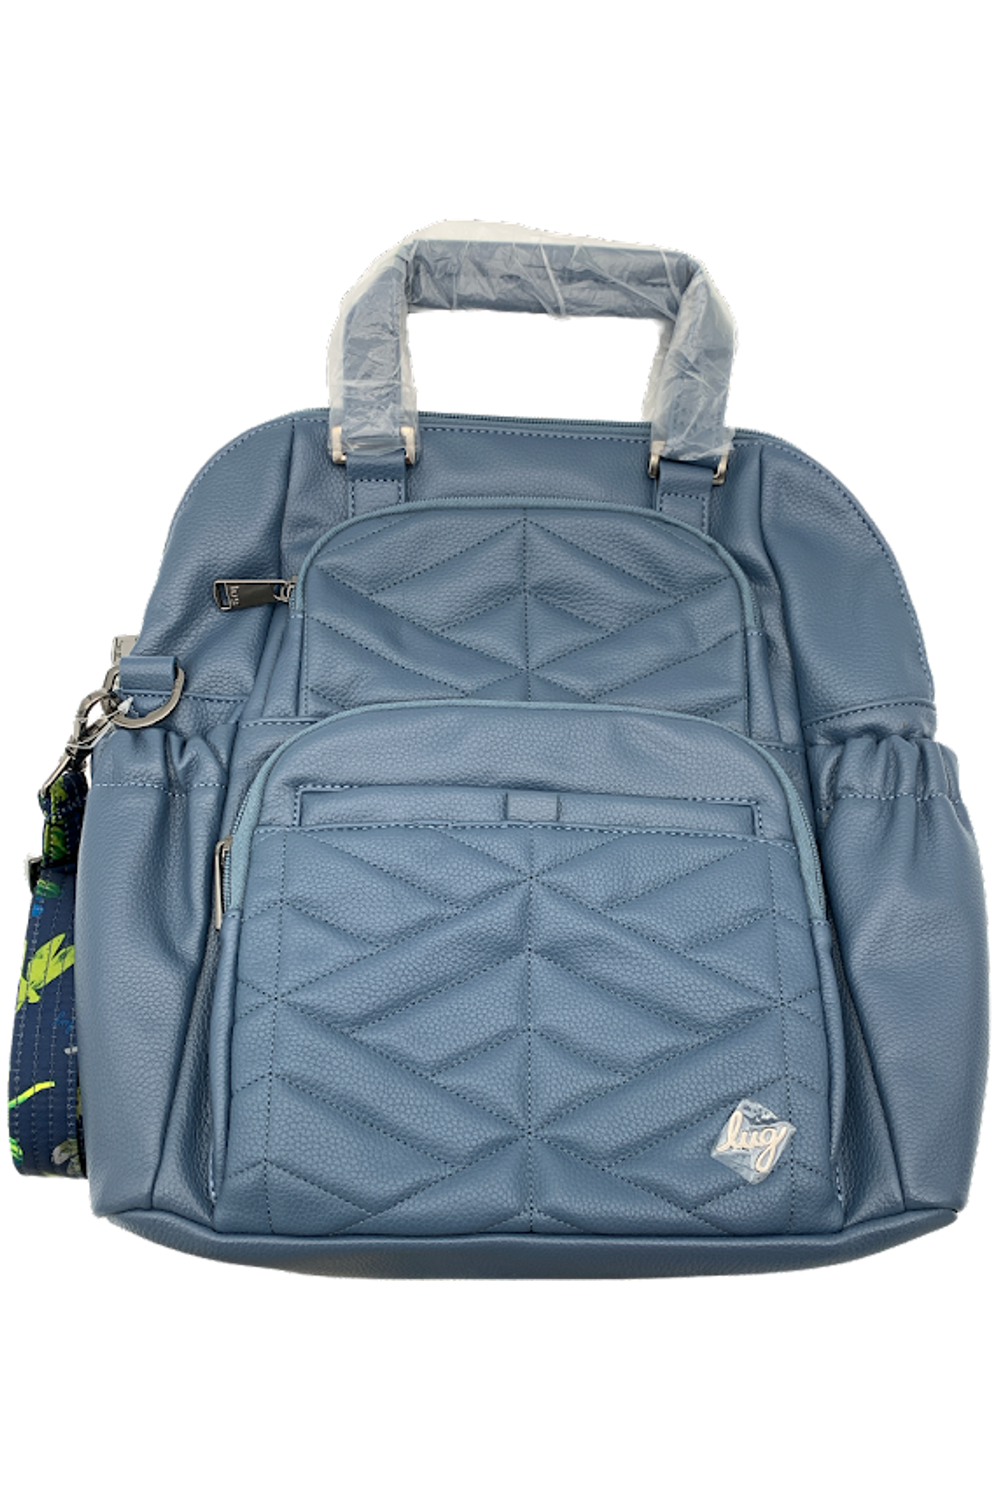 Lug Classic VL Convertible Backpack Canter Navy Blue